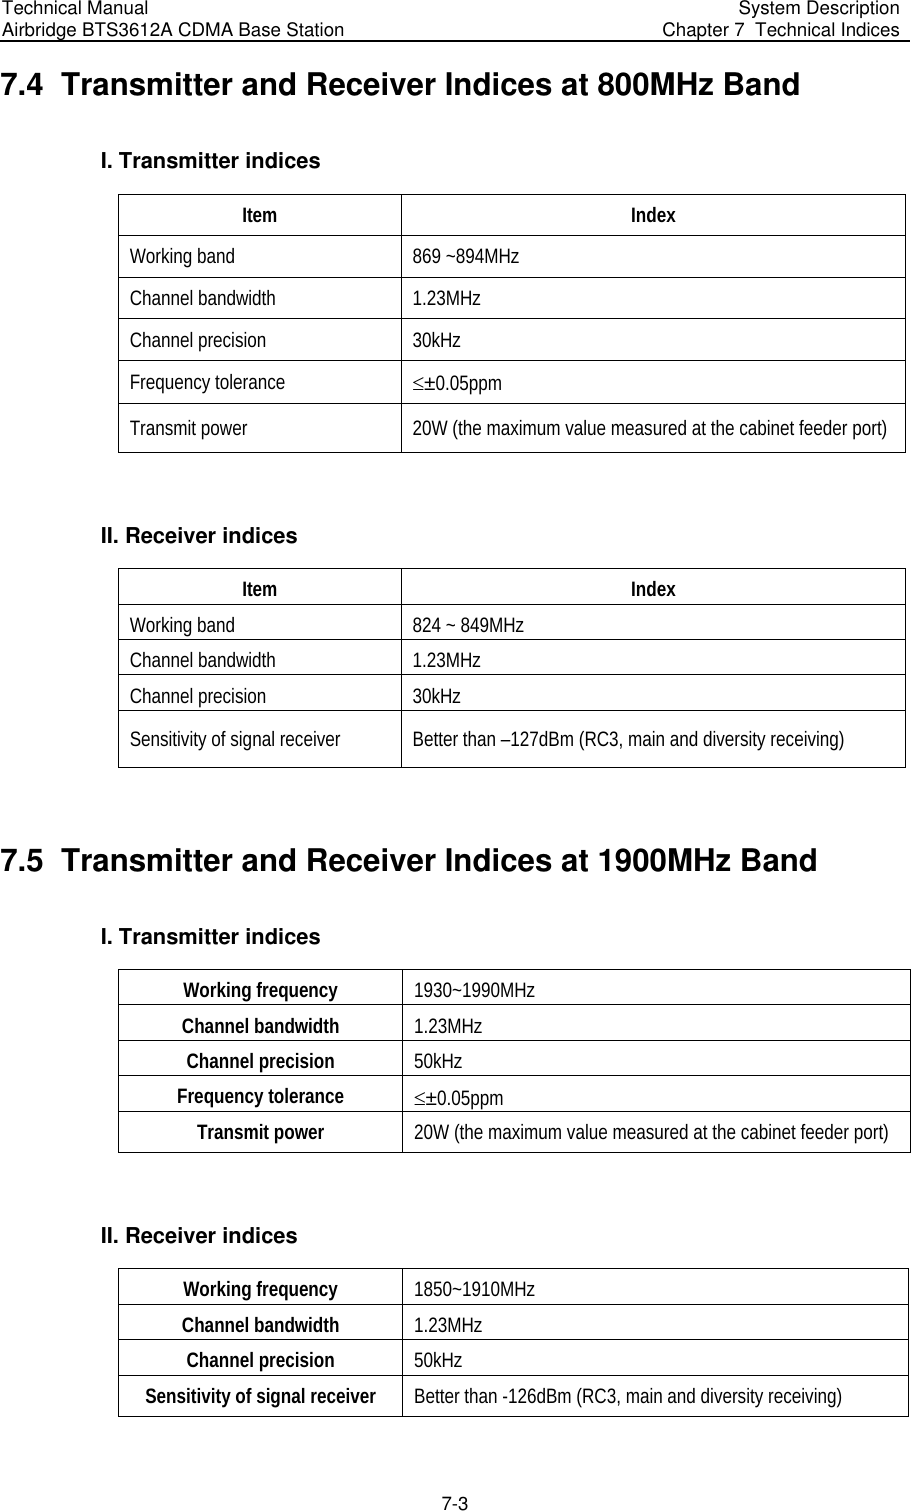 Technical Manual Airbridge BTS3612A CDMA Base Station System Description Chapter 7  Technical Indices  7-3 7.4  Transmitter and Receiver Indices at 800MHz Band  I. Transmitter indices Item Index Working band  869 ~894MHz Channel bandwidth  1.23MHz Channel precision  30kHz Frequency tolerance  ≤±0.05ppm Transmit power  20W (the maximum value measured at the cabinet feeder port)  II. Receiver indices Item Index Working band  824 ~ 849MHz Channel bandwidth  1.23MHz Channel precision  30kHz Sensitivity of signal receiver  Better than –127dBm (RC3, main and diversity receiving)  7.5  Transmitter and Receiver Indices at 1900MHz Band  I. Transmitter indices  Working frequency  1930~1990MHz Channel bandwidth  1.23MHz Channel precision  50kHz Frequency tolerance  ≤±0.05ppm Transmit power  20W (the maximum value measured at the cabinet feeder port)  II. Receiver indices Working frequency  1850~1910MHz Channel bandwidth  1.23MHz Channel precision  50kHz Sensitivity of signal receiver  Better than -126dBm (RC3, main and diversity receiving)  